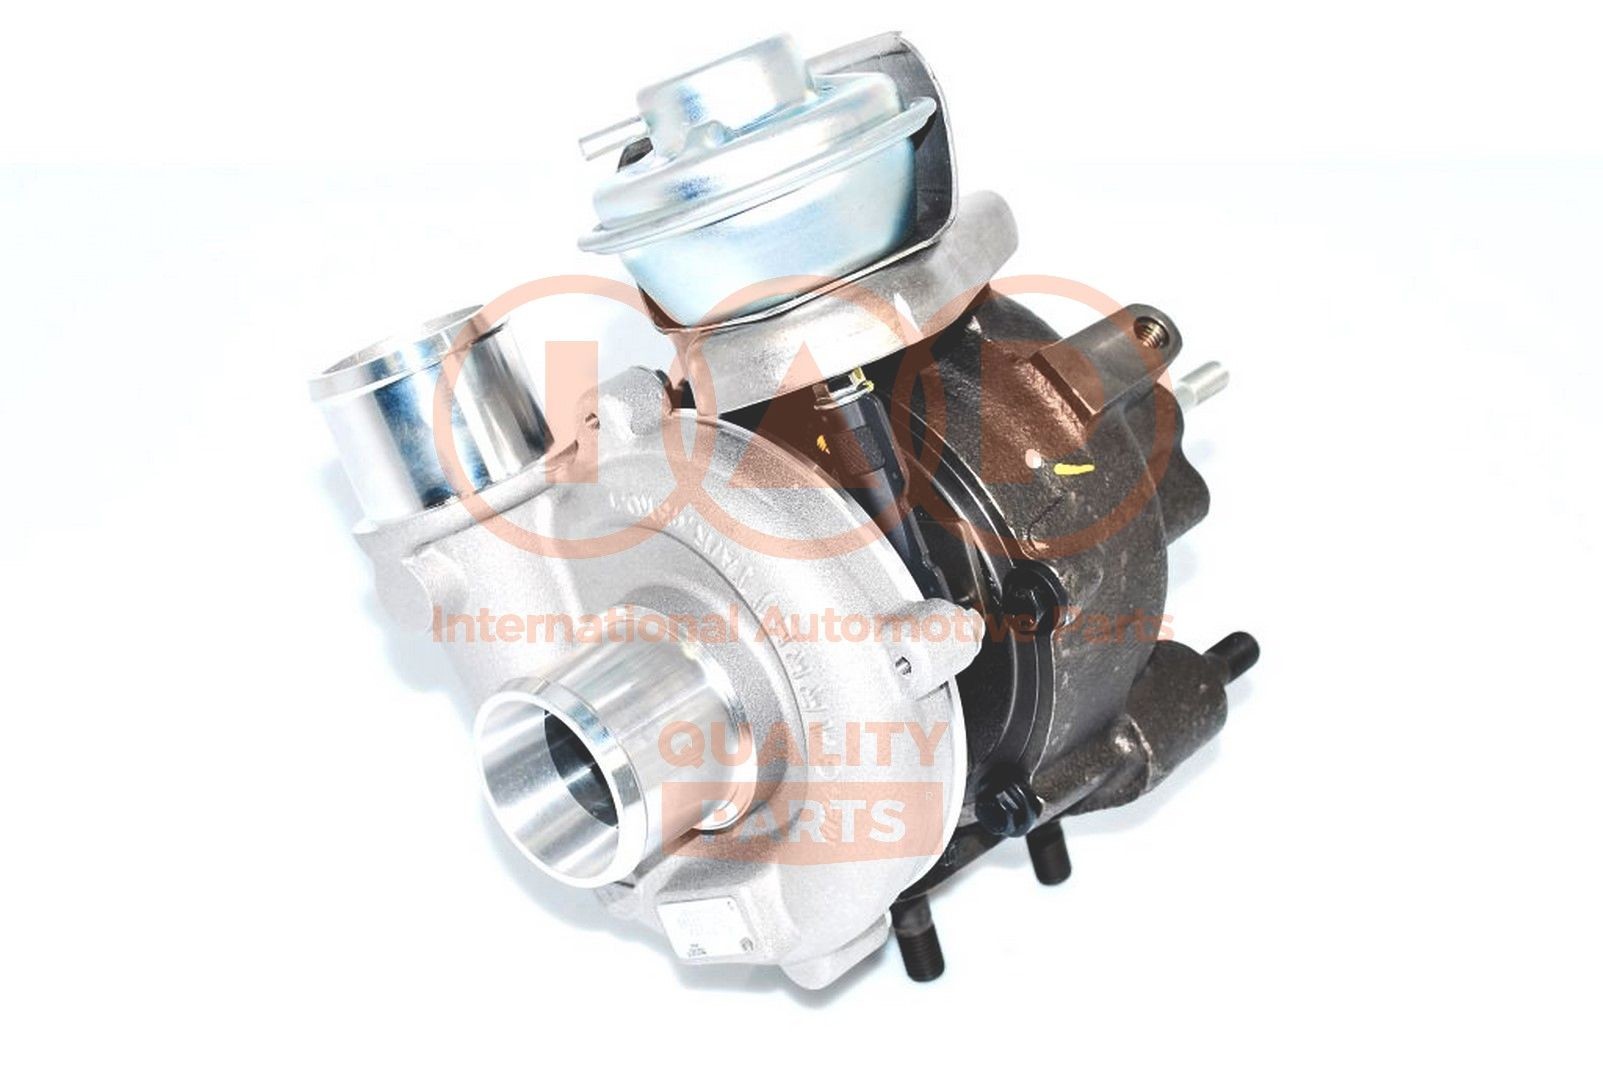 Original 129-17057G IAP QUALITY PARTS Turbocharger experience and price